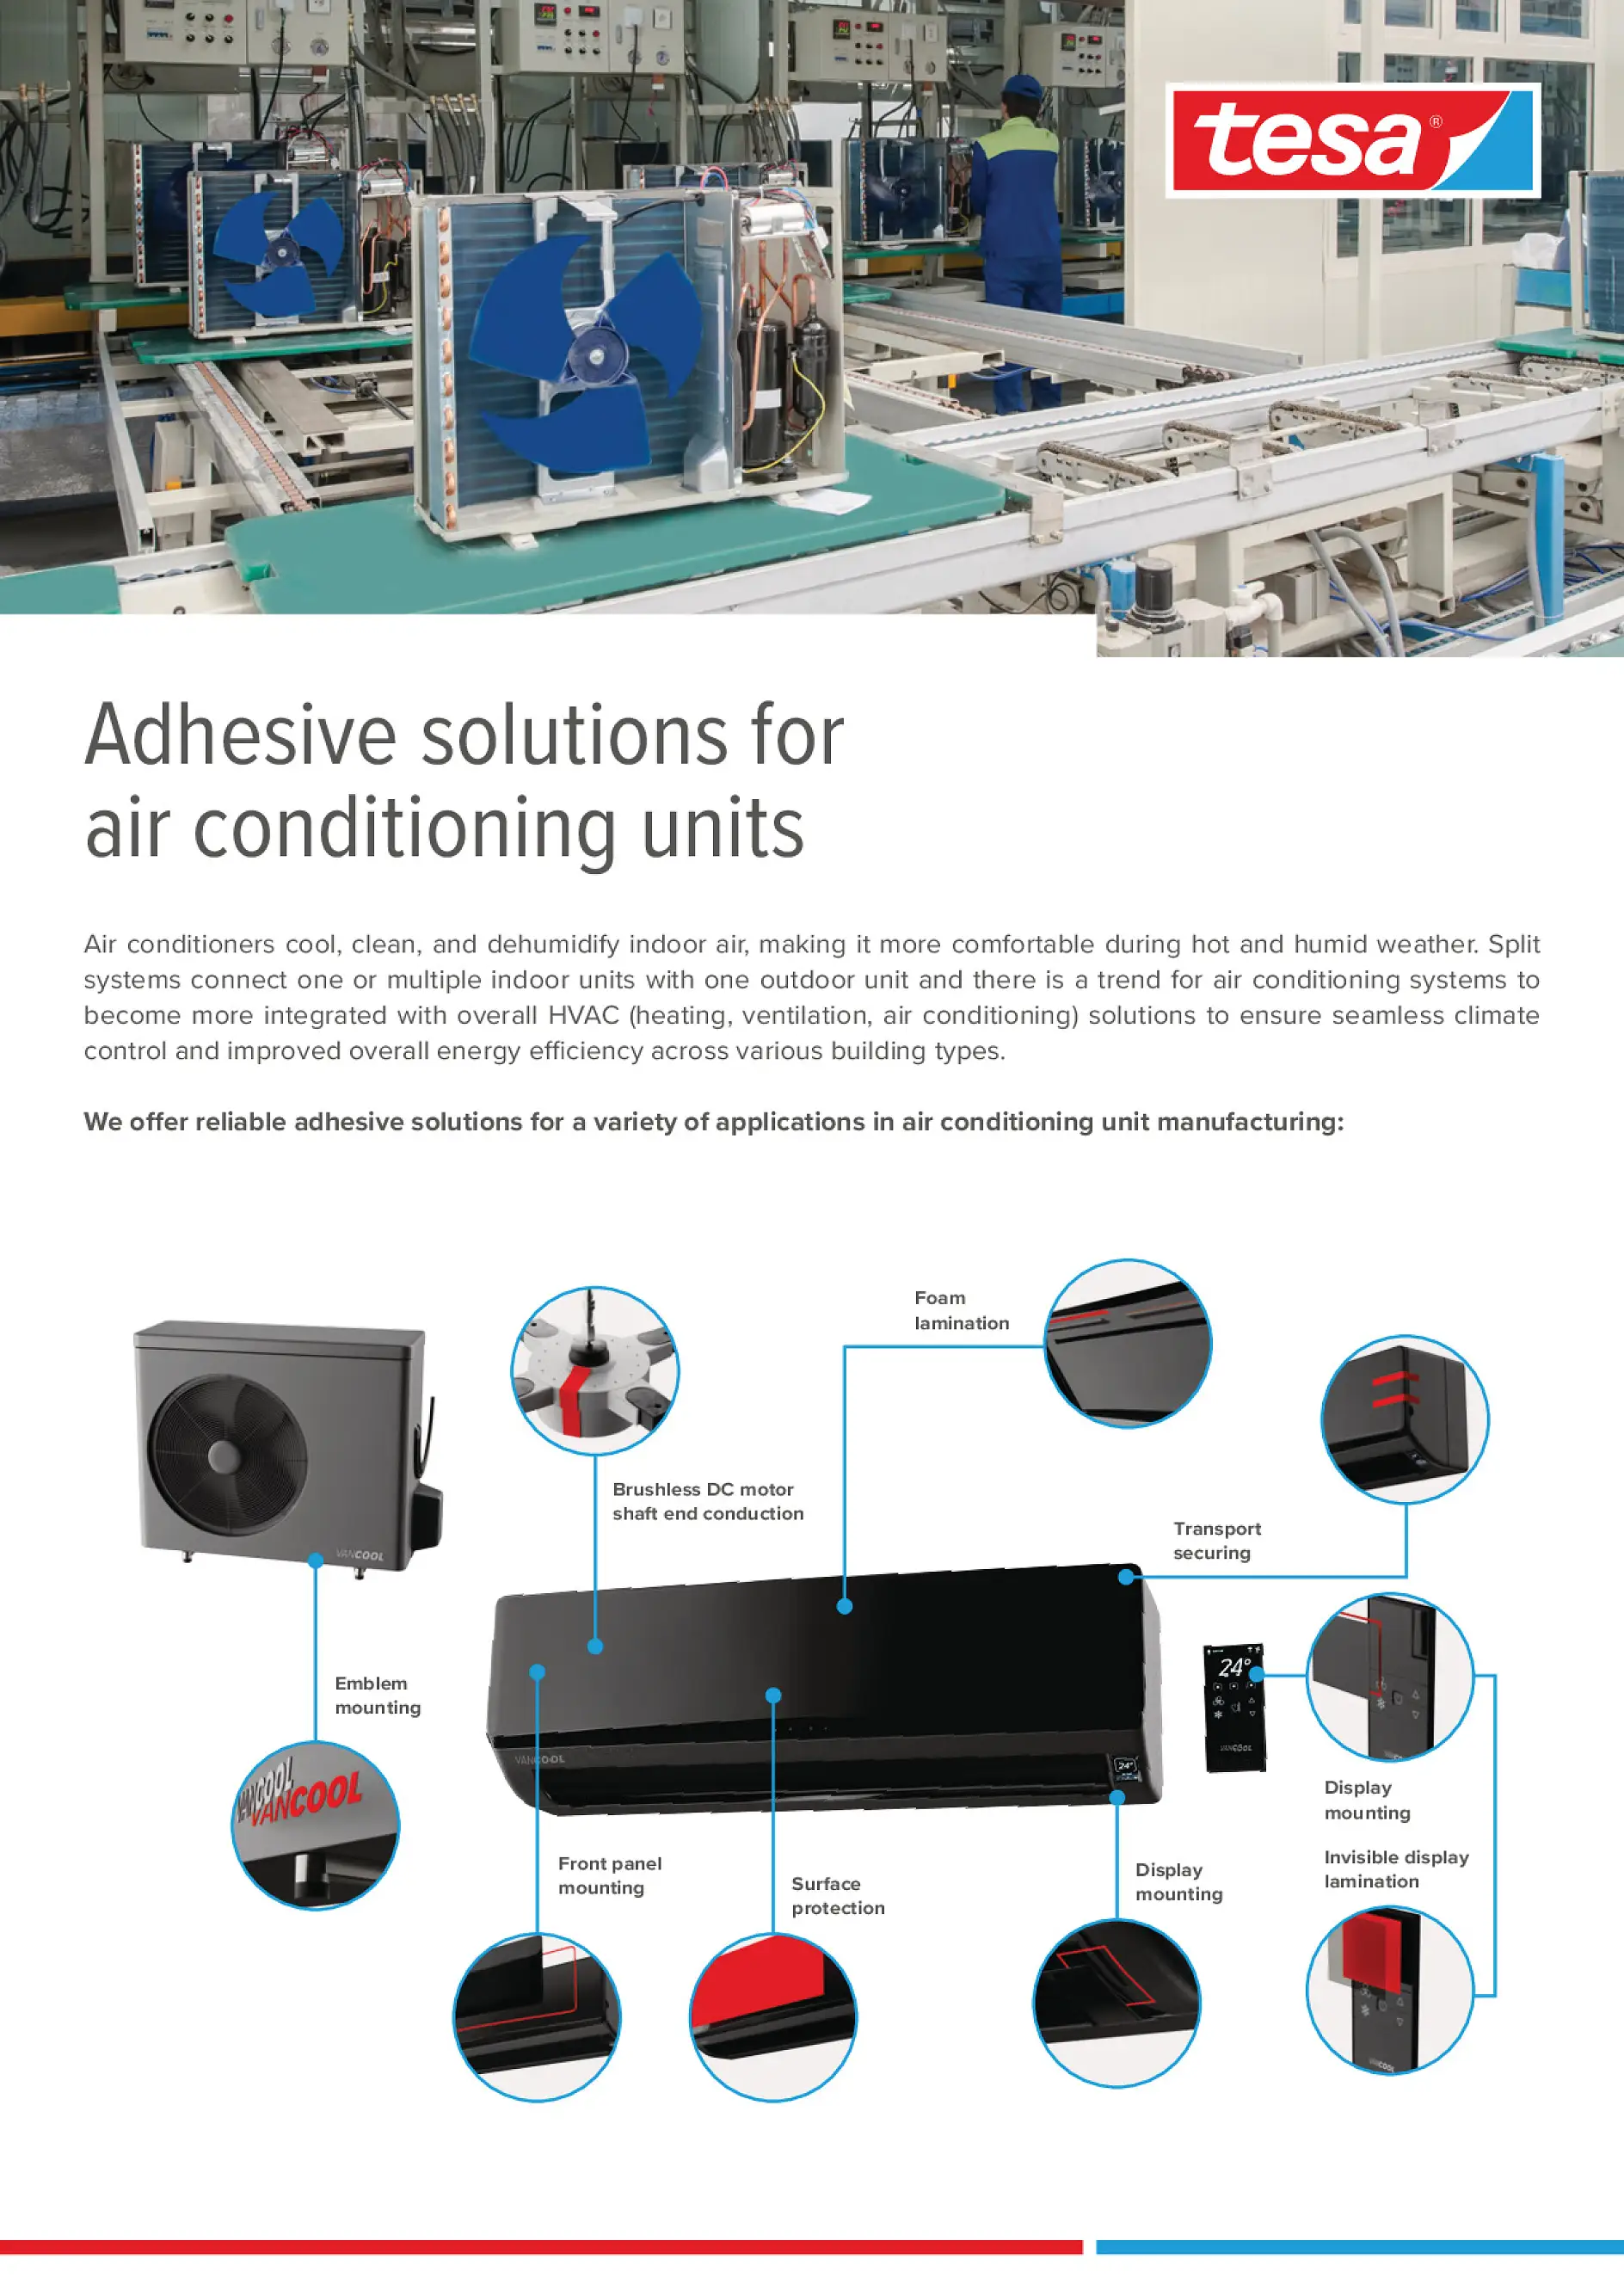 Adhesive solutions for air conditioning units